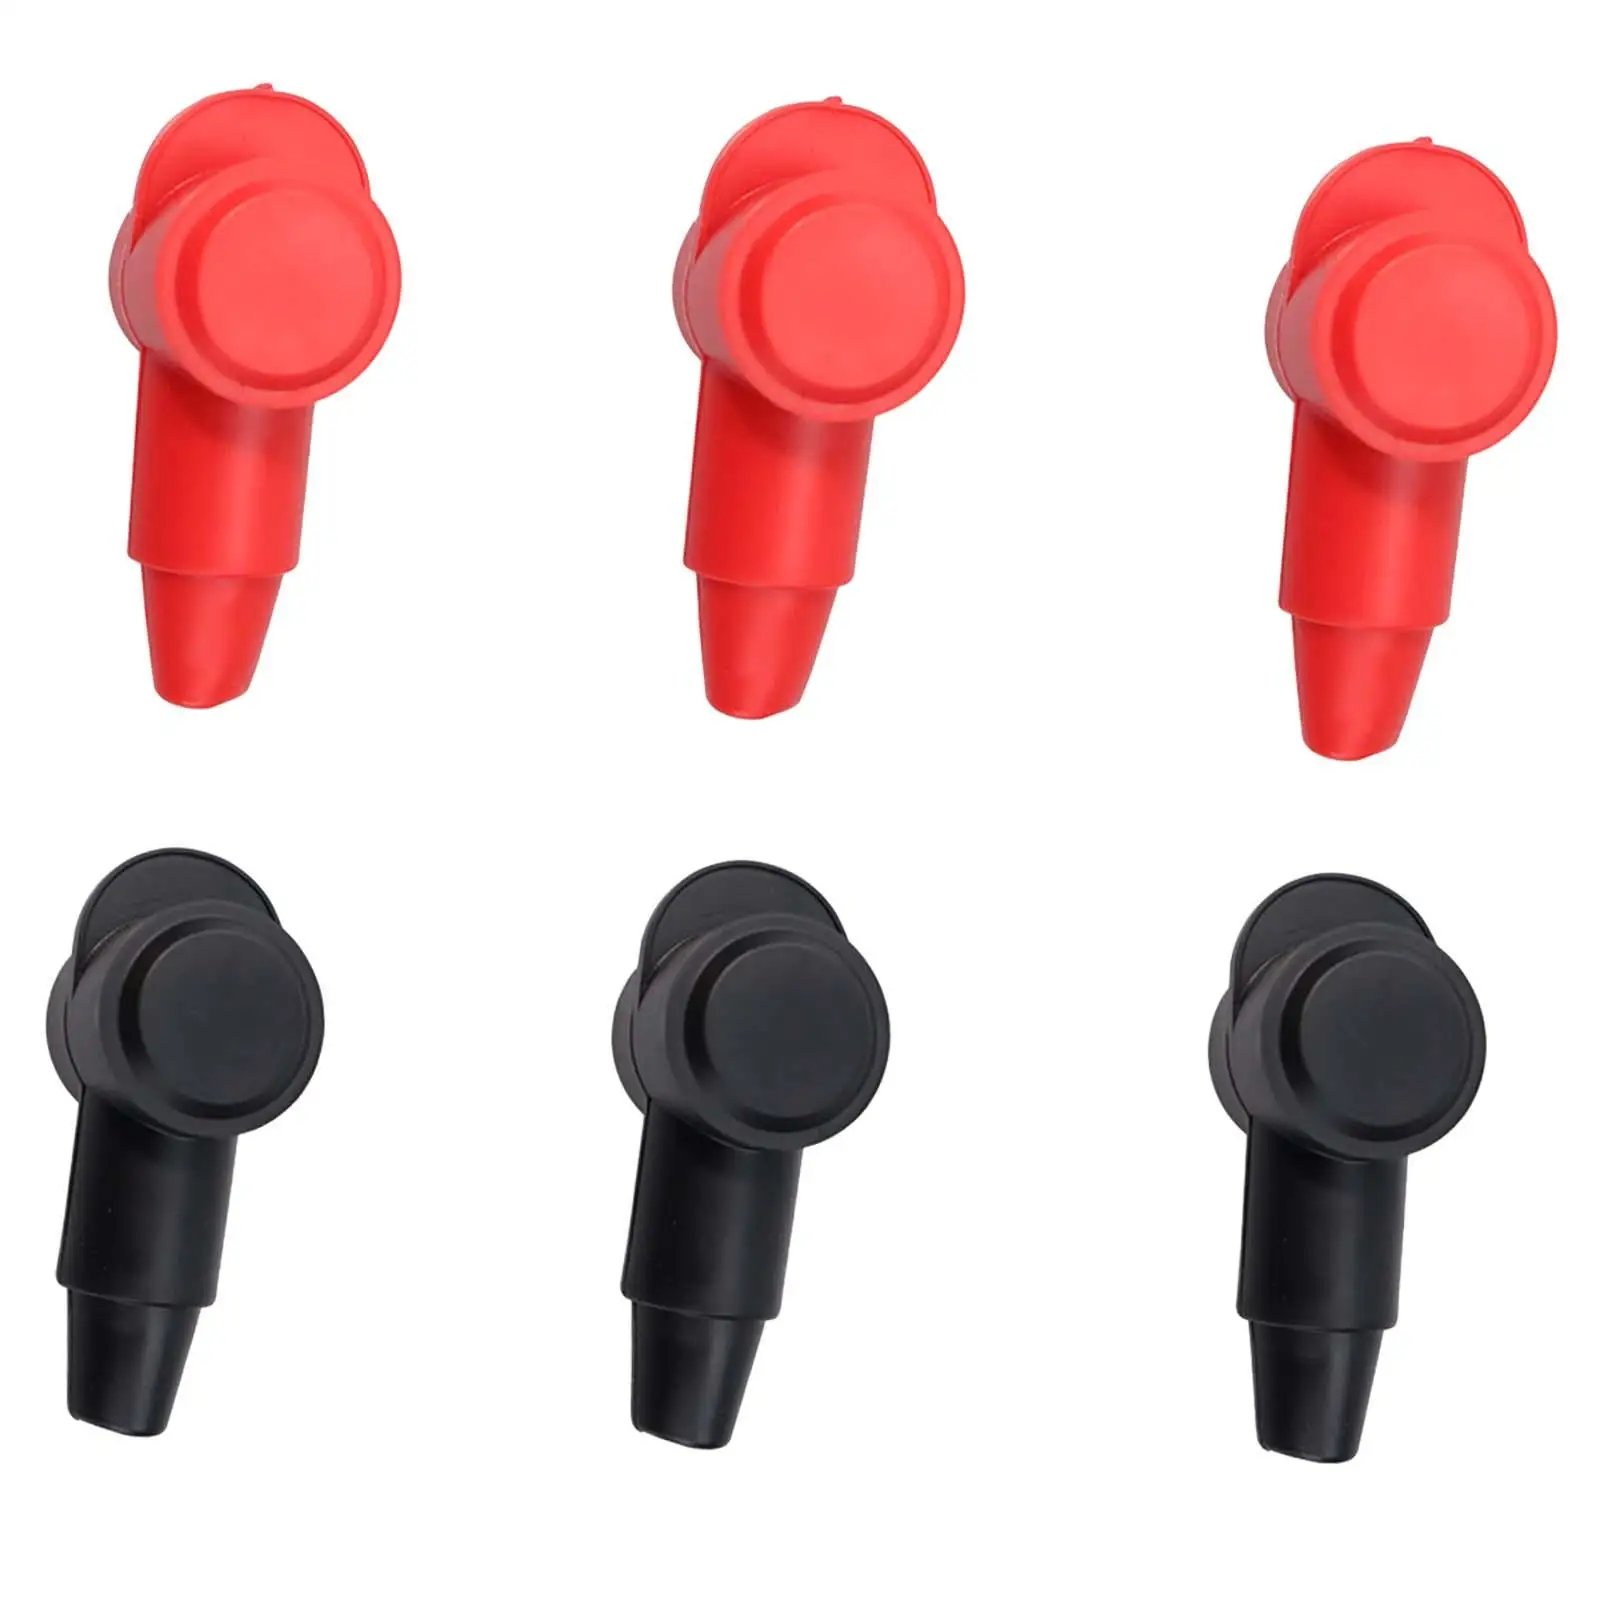 Battery Stud Terminal Covers Red and Black Flexible Protective Terminal Caps for Trucks Automotive Cars Marine Boats